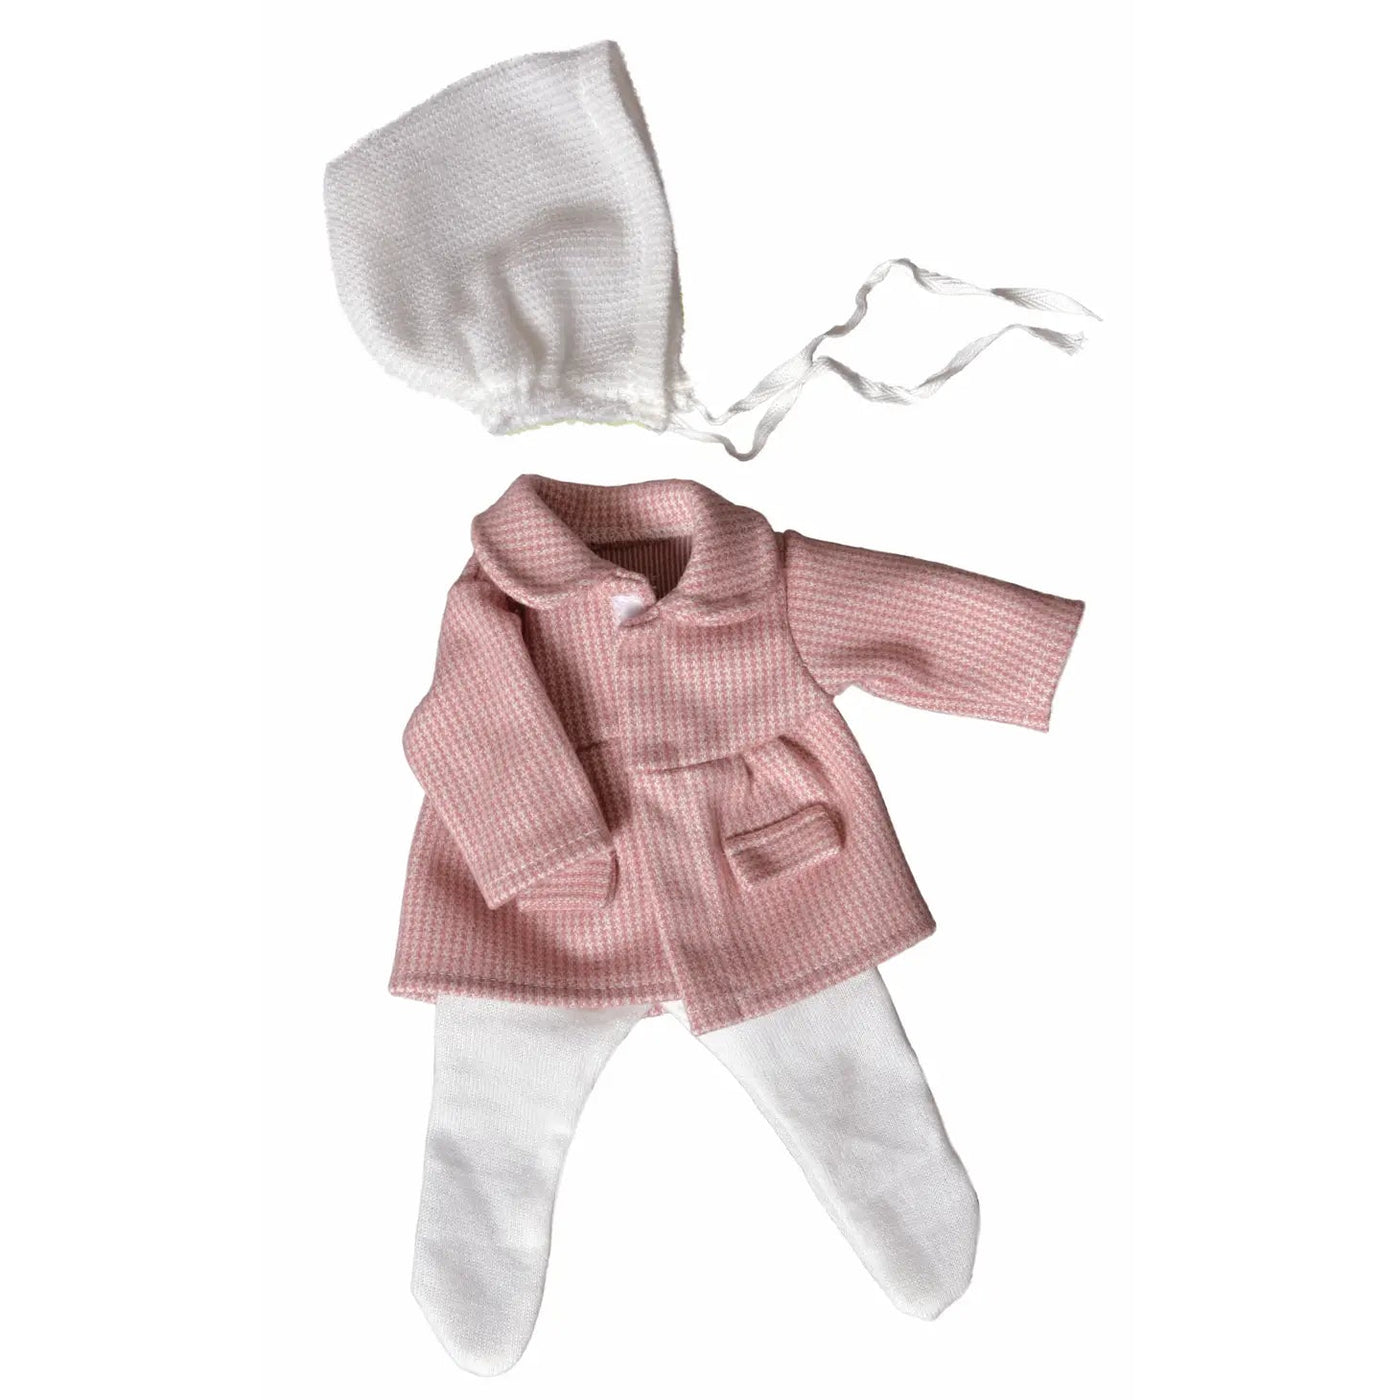 Egmont Pearly Pink Doll Clothes